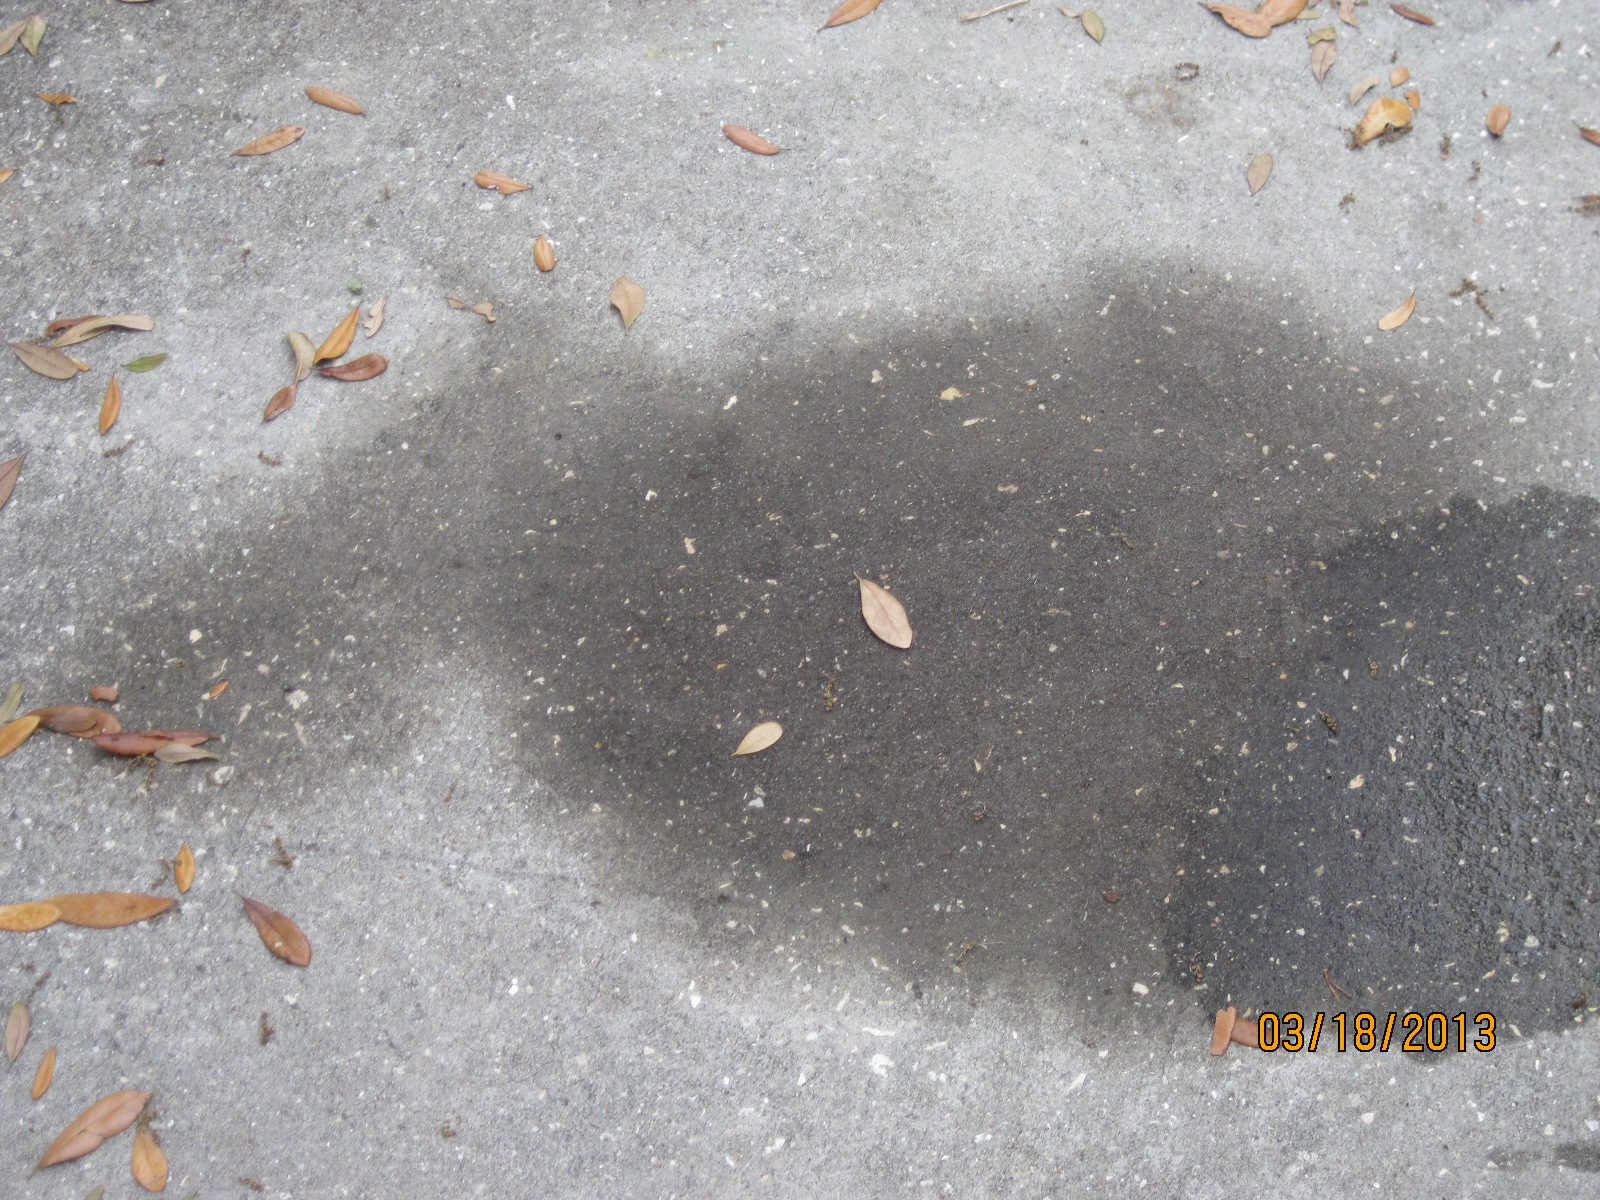 This is the oil leak from the damage Tire Choice caused to my engine.  The overflow of oil leaked onto my driveway.